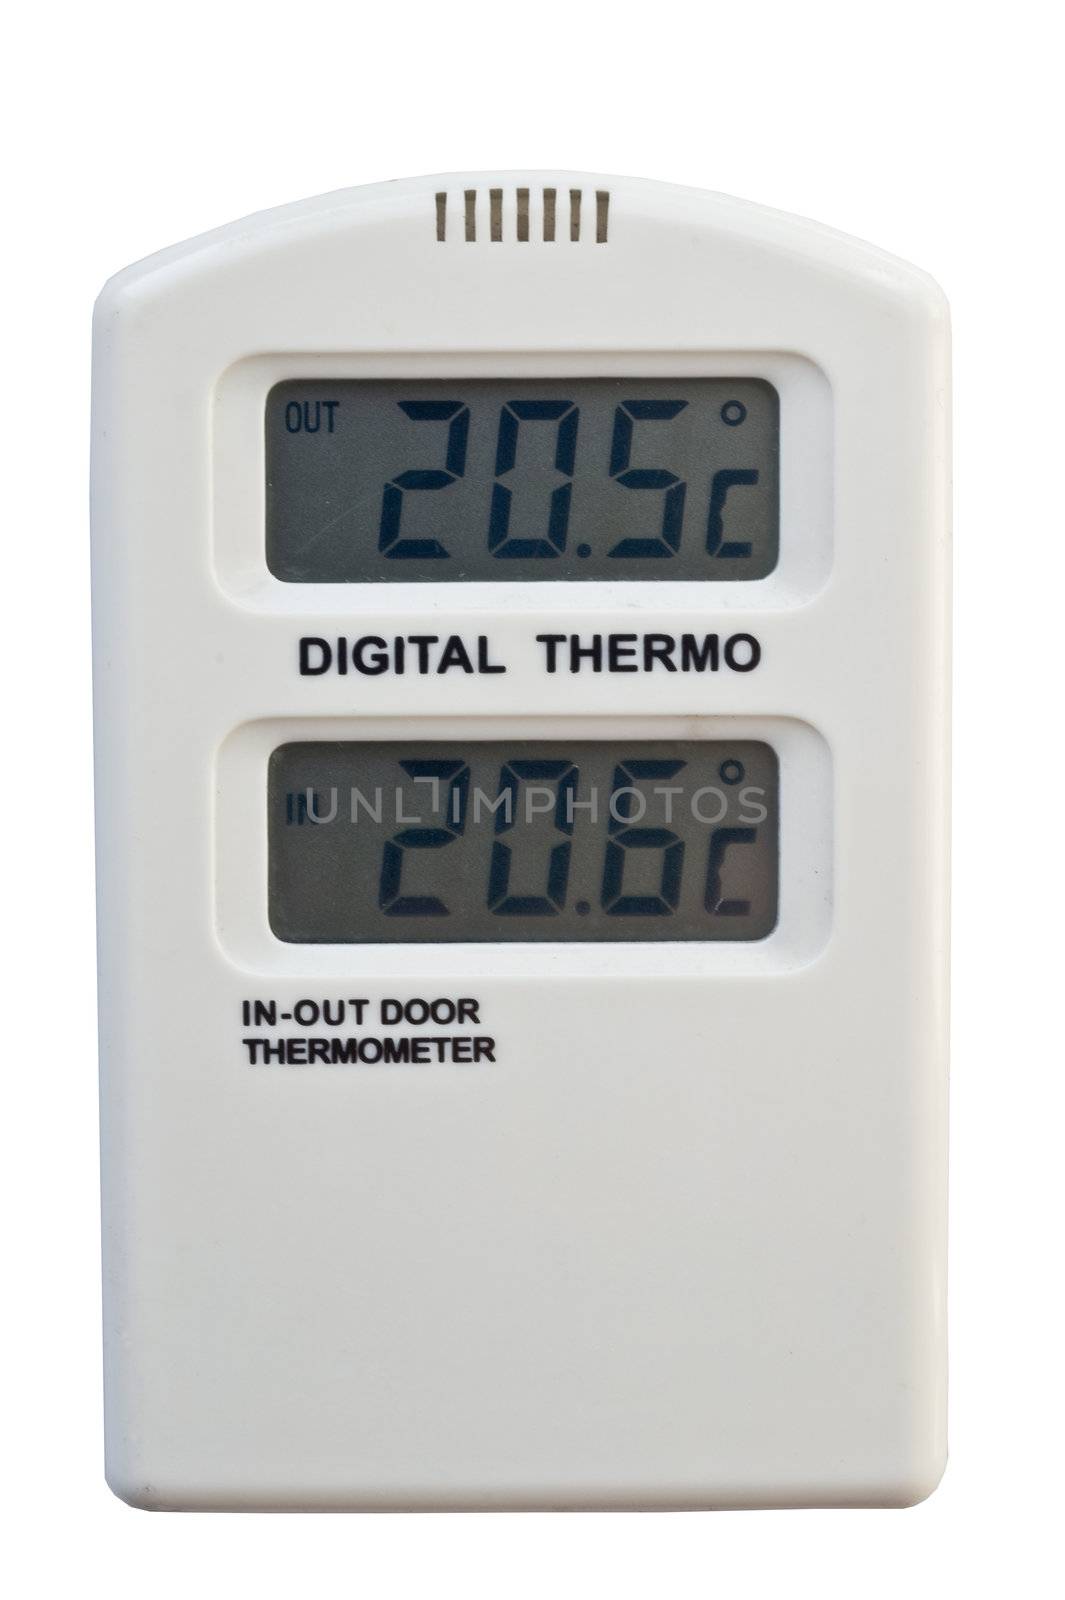 Digital thermometer by Alenmax